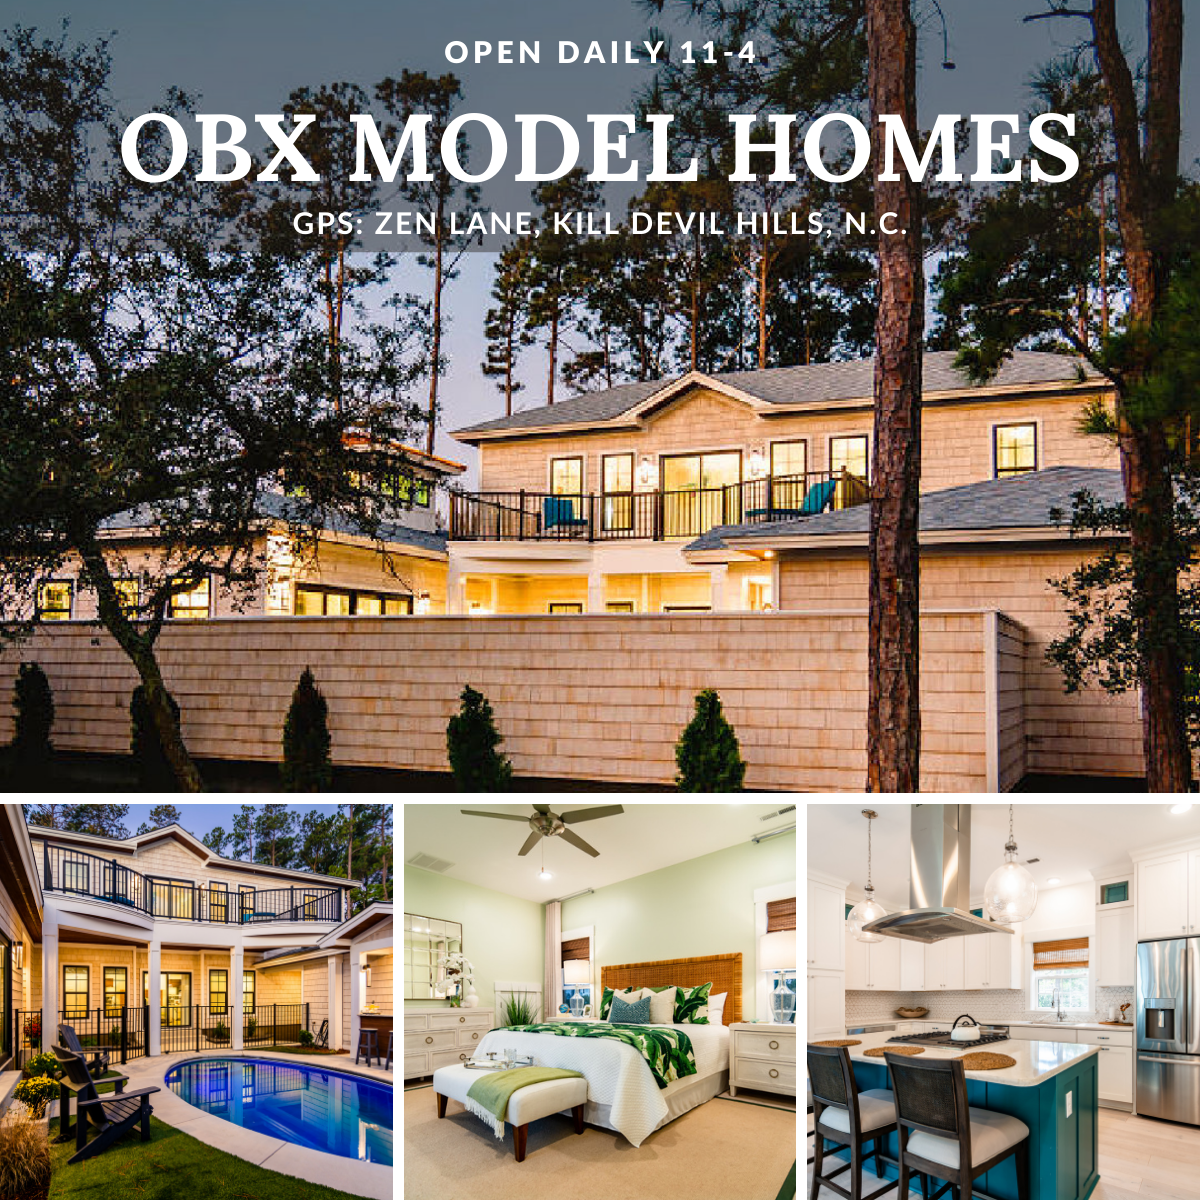 Model homes open for Home and land packages model homes water oak kill devil hills nc SAGA